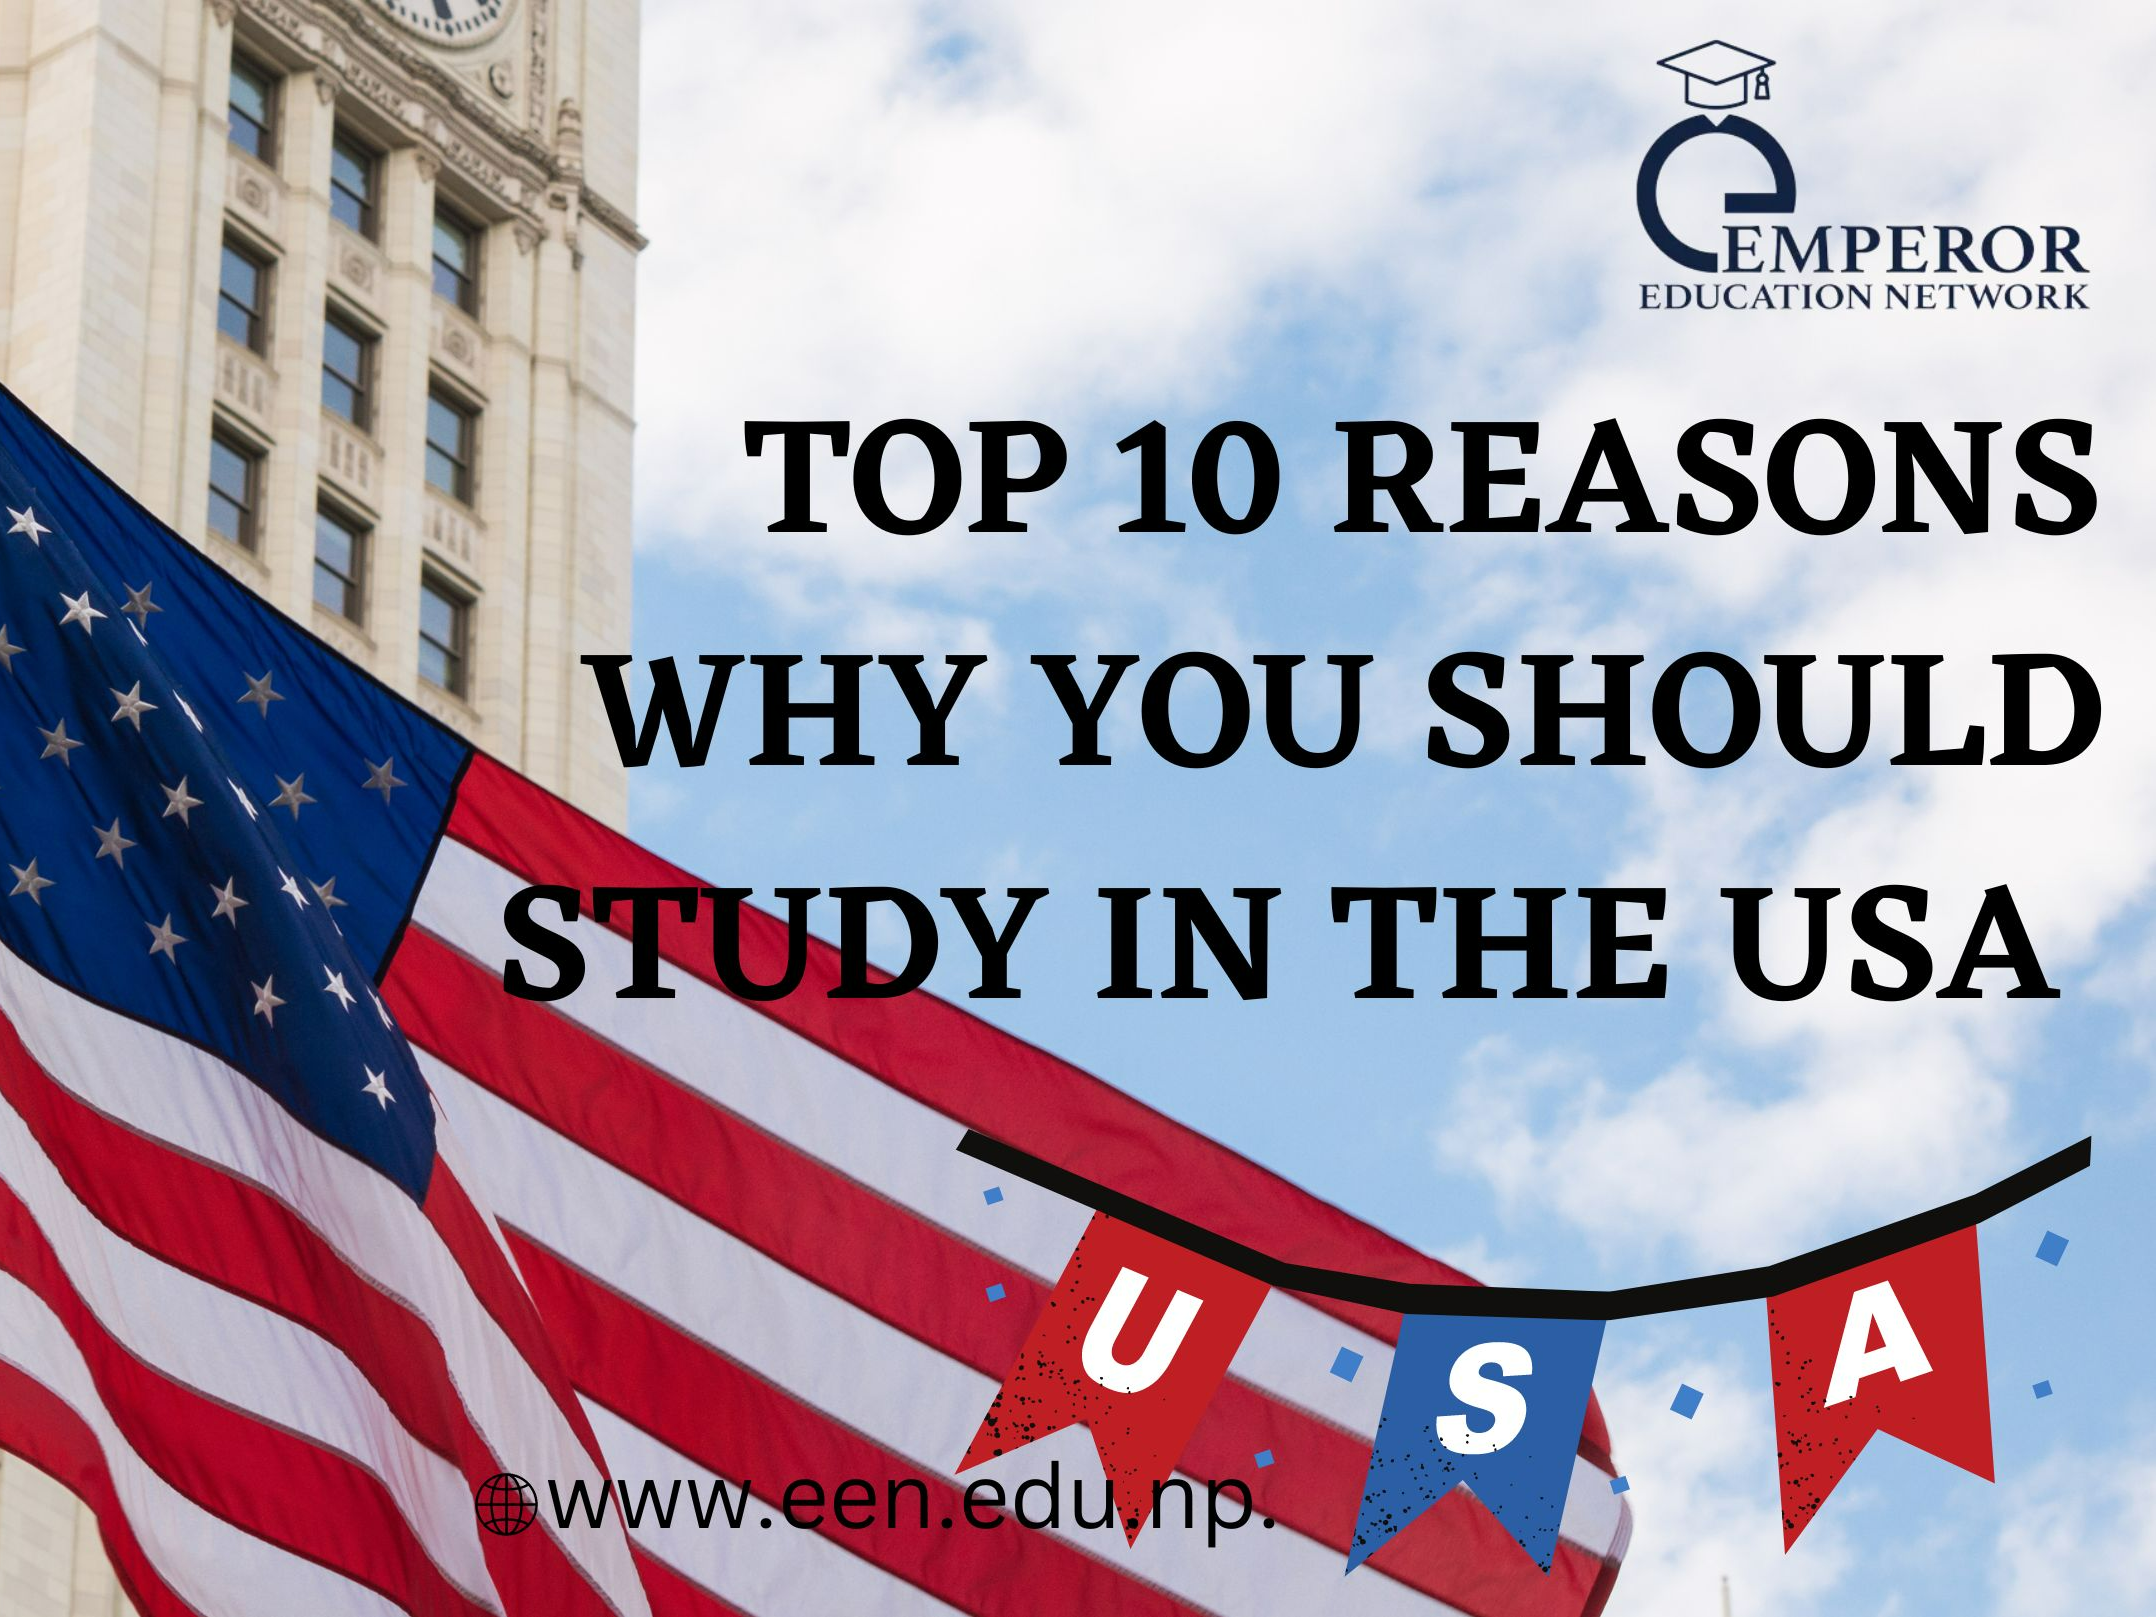 Top 10 Reasons Why You Should Study in the USA